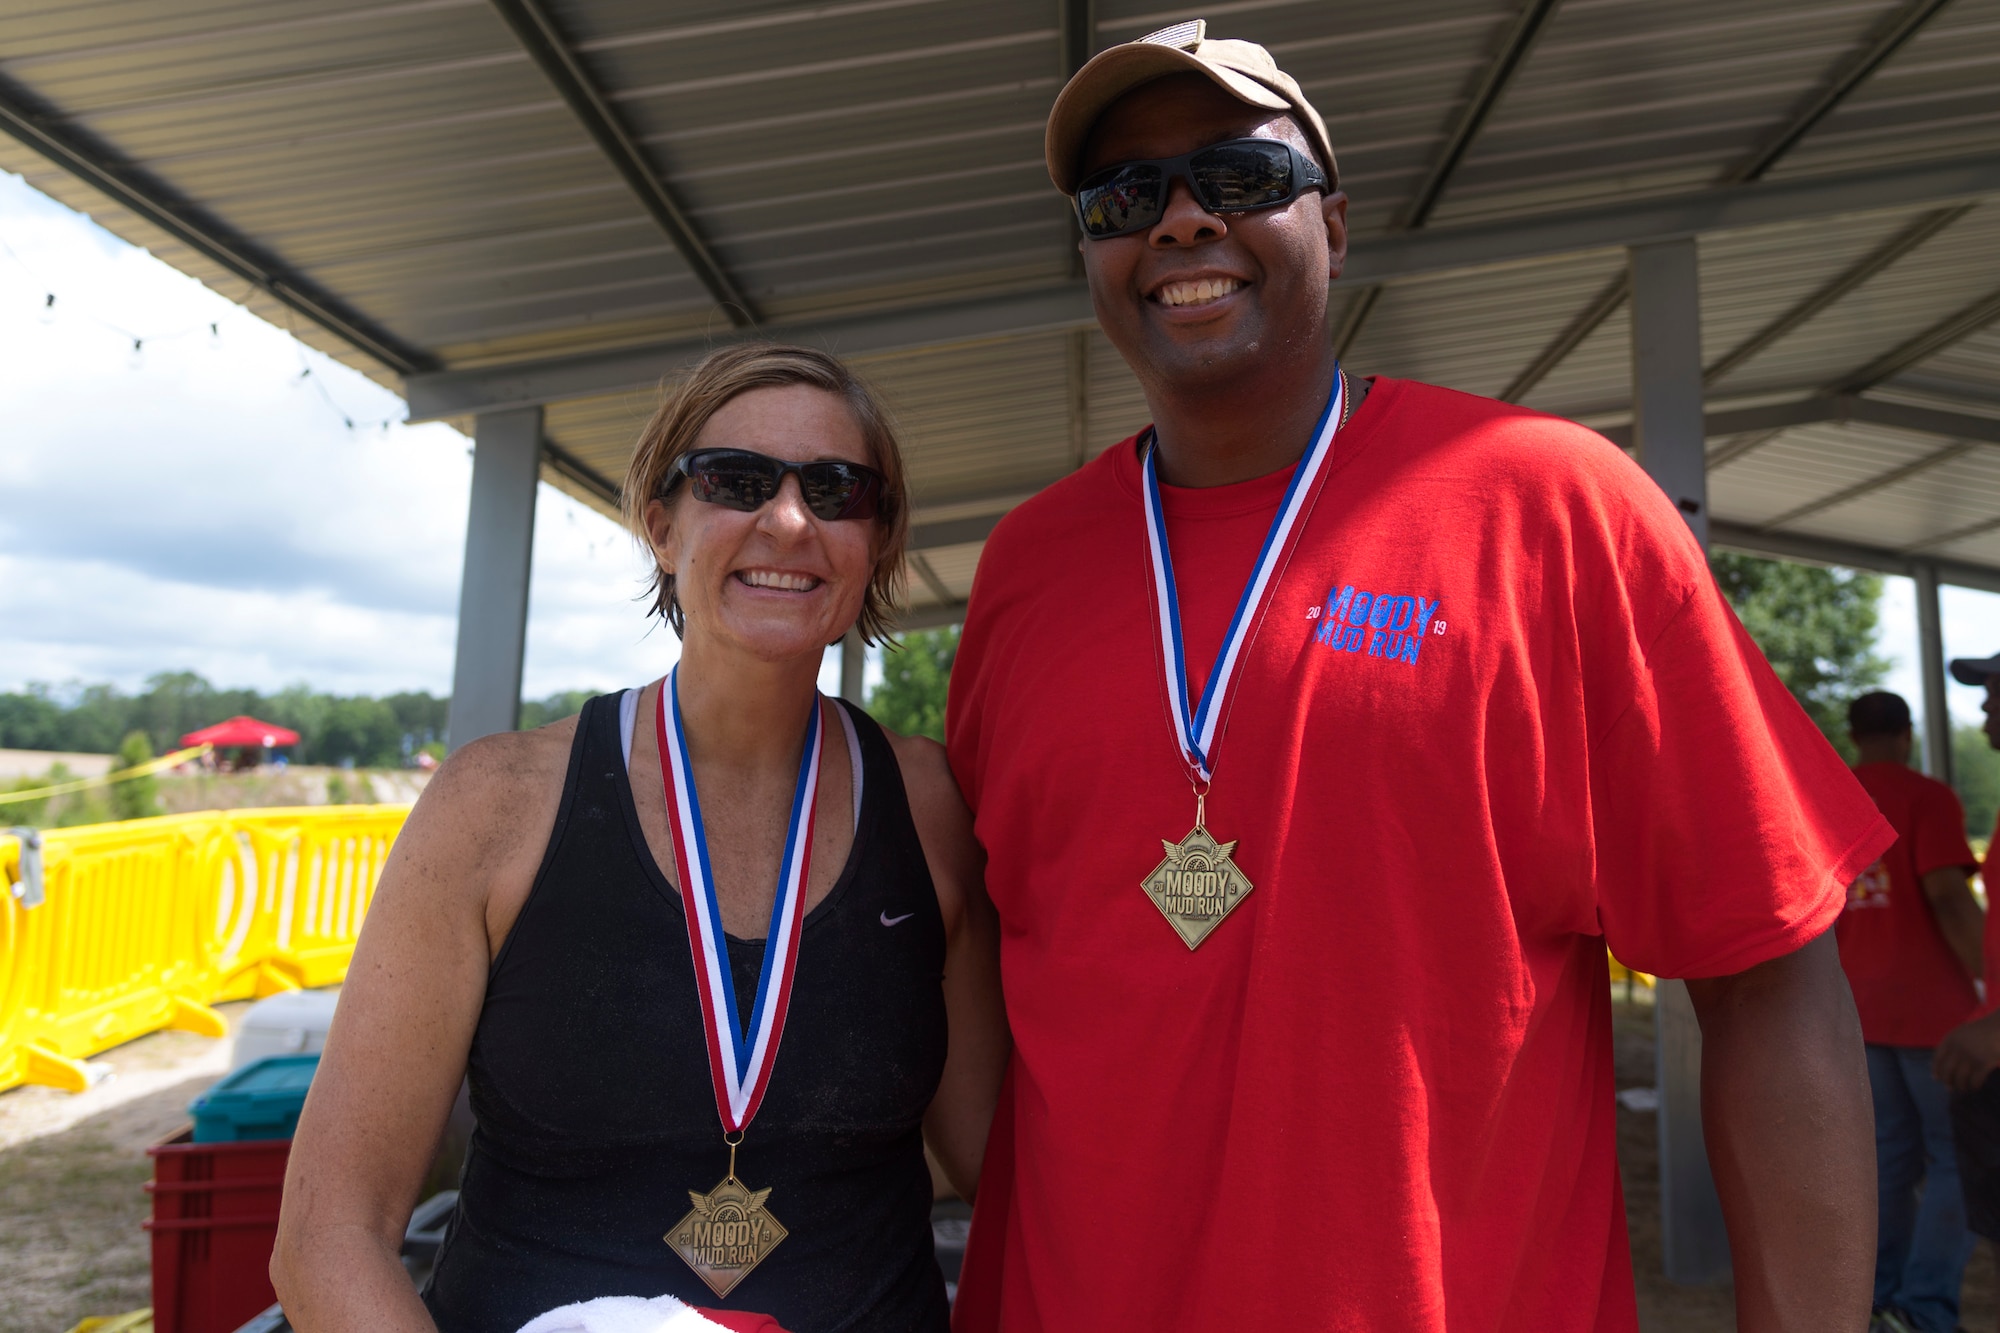 Col. Jennifer Short, left, 23d Wing commander, and Chief Master Sgt. James Allen, right, 23d Wing command chief, pose for a photo after the Moody Mud Run, May 4, 2019, at Possum Creek Off-Road Park in Ray City, Ga. The sixth annual Moody Mud Run had approximately 850 participants who had to overcome a series of obstacles on the 4 and 5-mile courses. The 32-obstacle course gave Airmen, families and the local community an opportunity to build camaraderie and teamwork skills. (U.S. Air Force Photo by Airman 1st Class Taryn Butler)